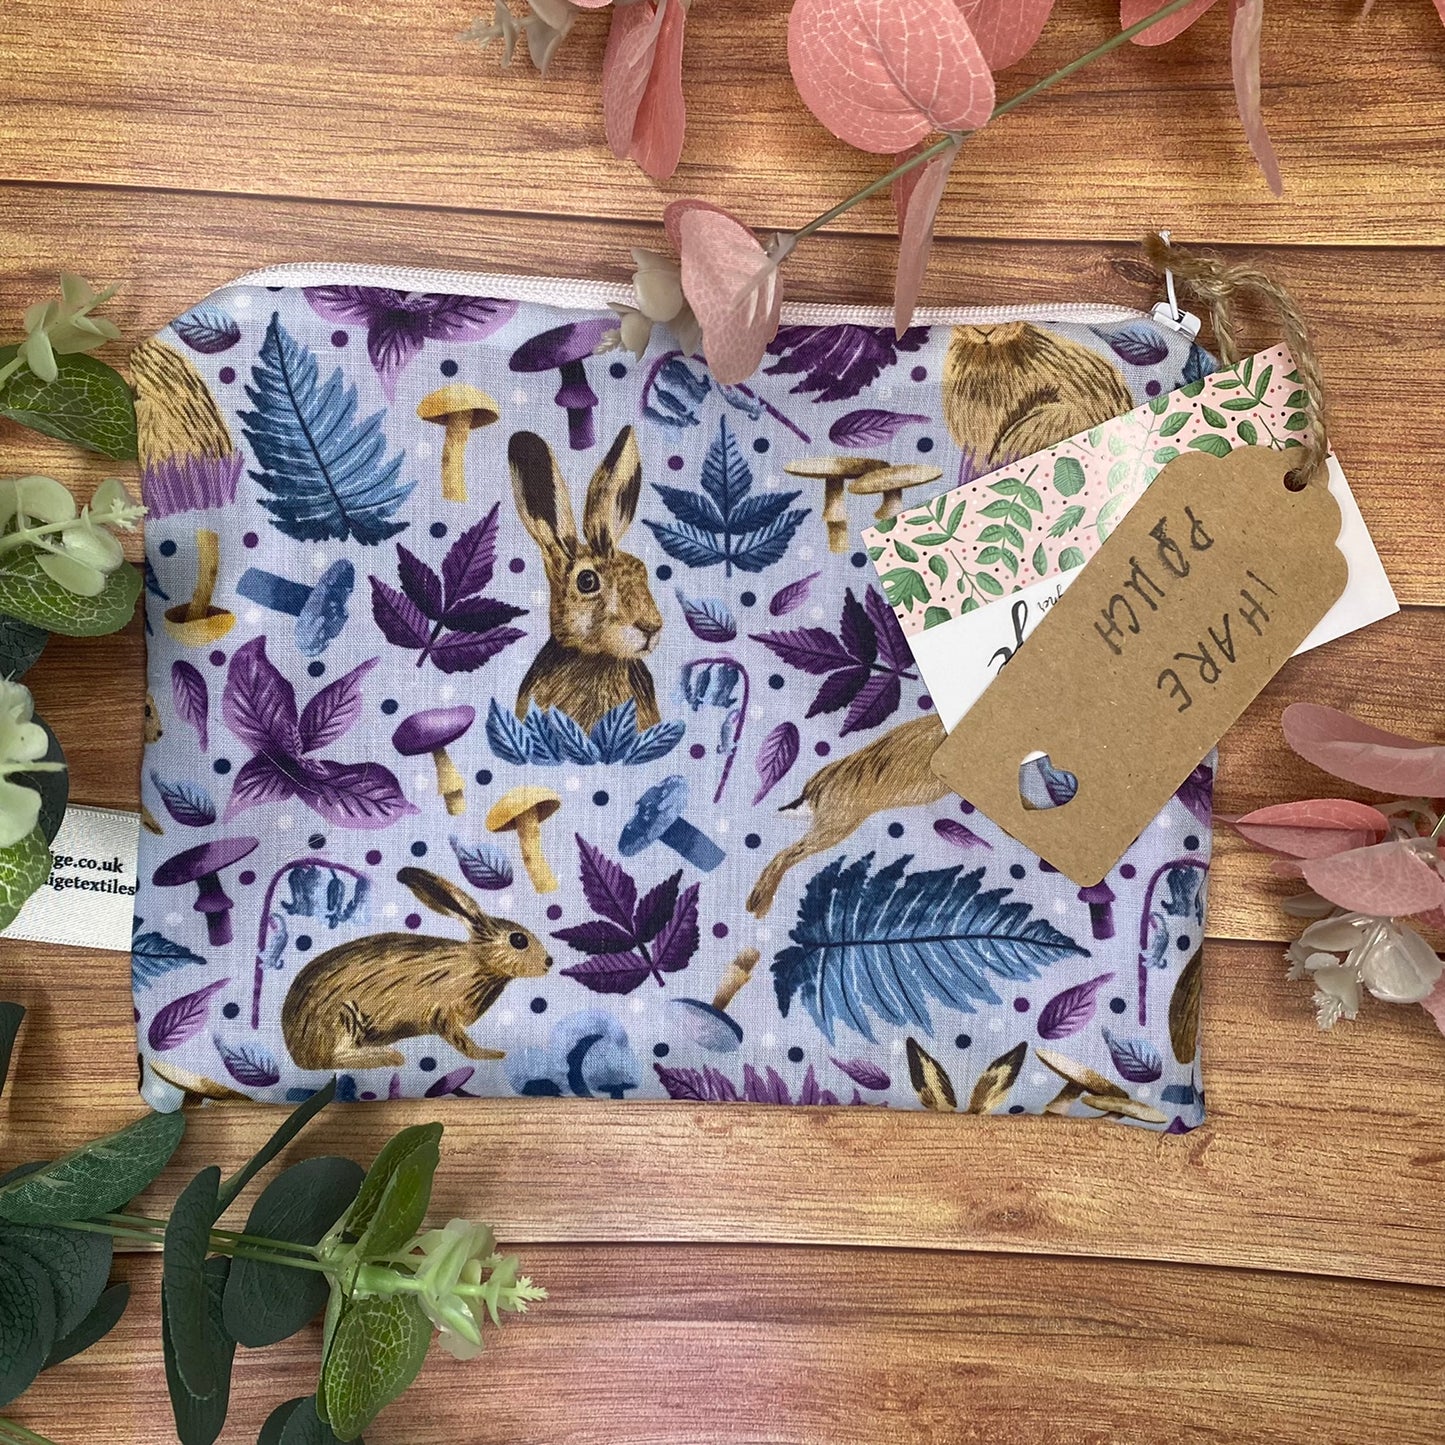 Pouch with a hare surface pattern design on a wooden surface with foliage